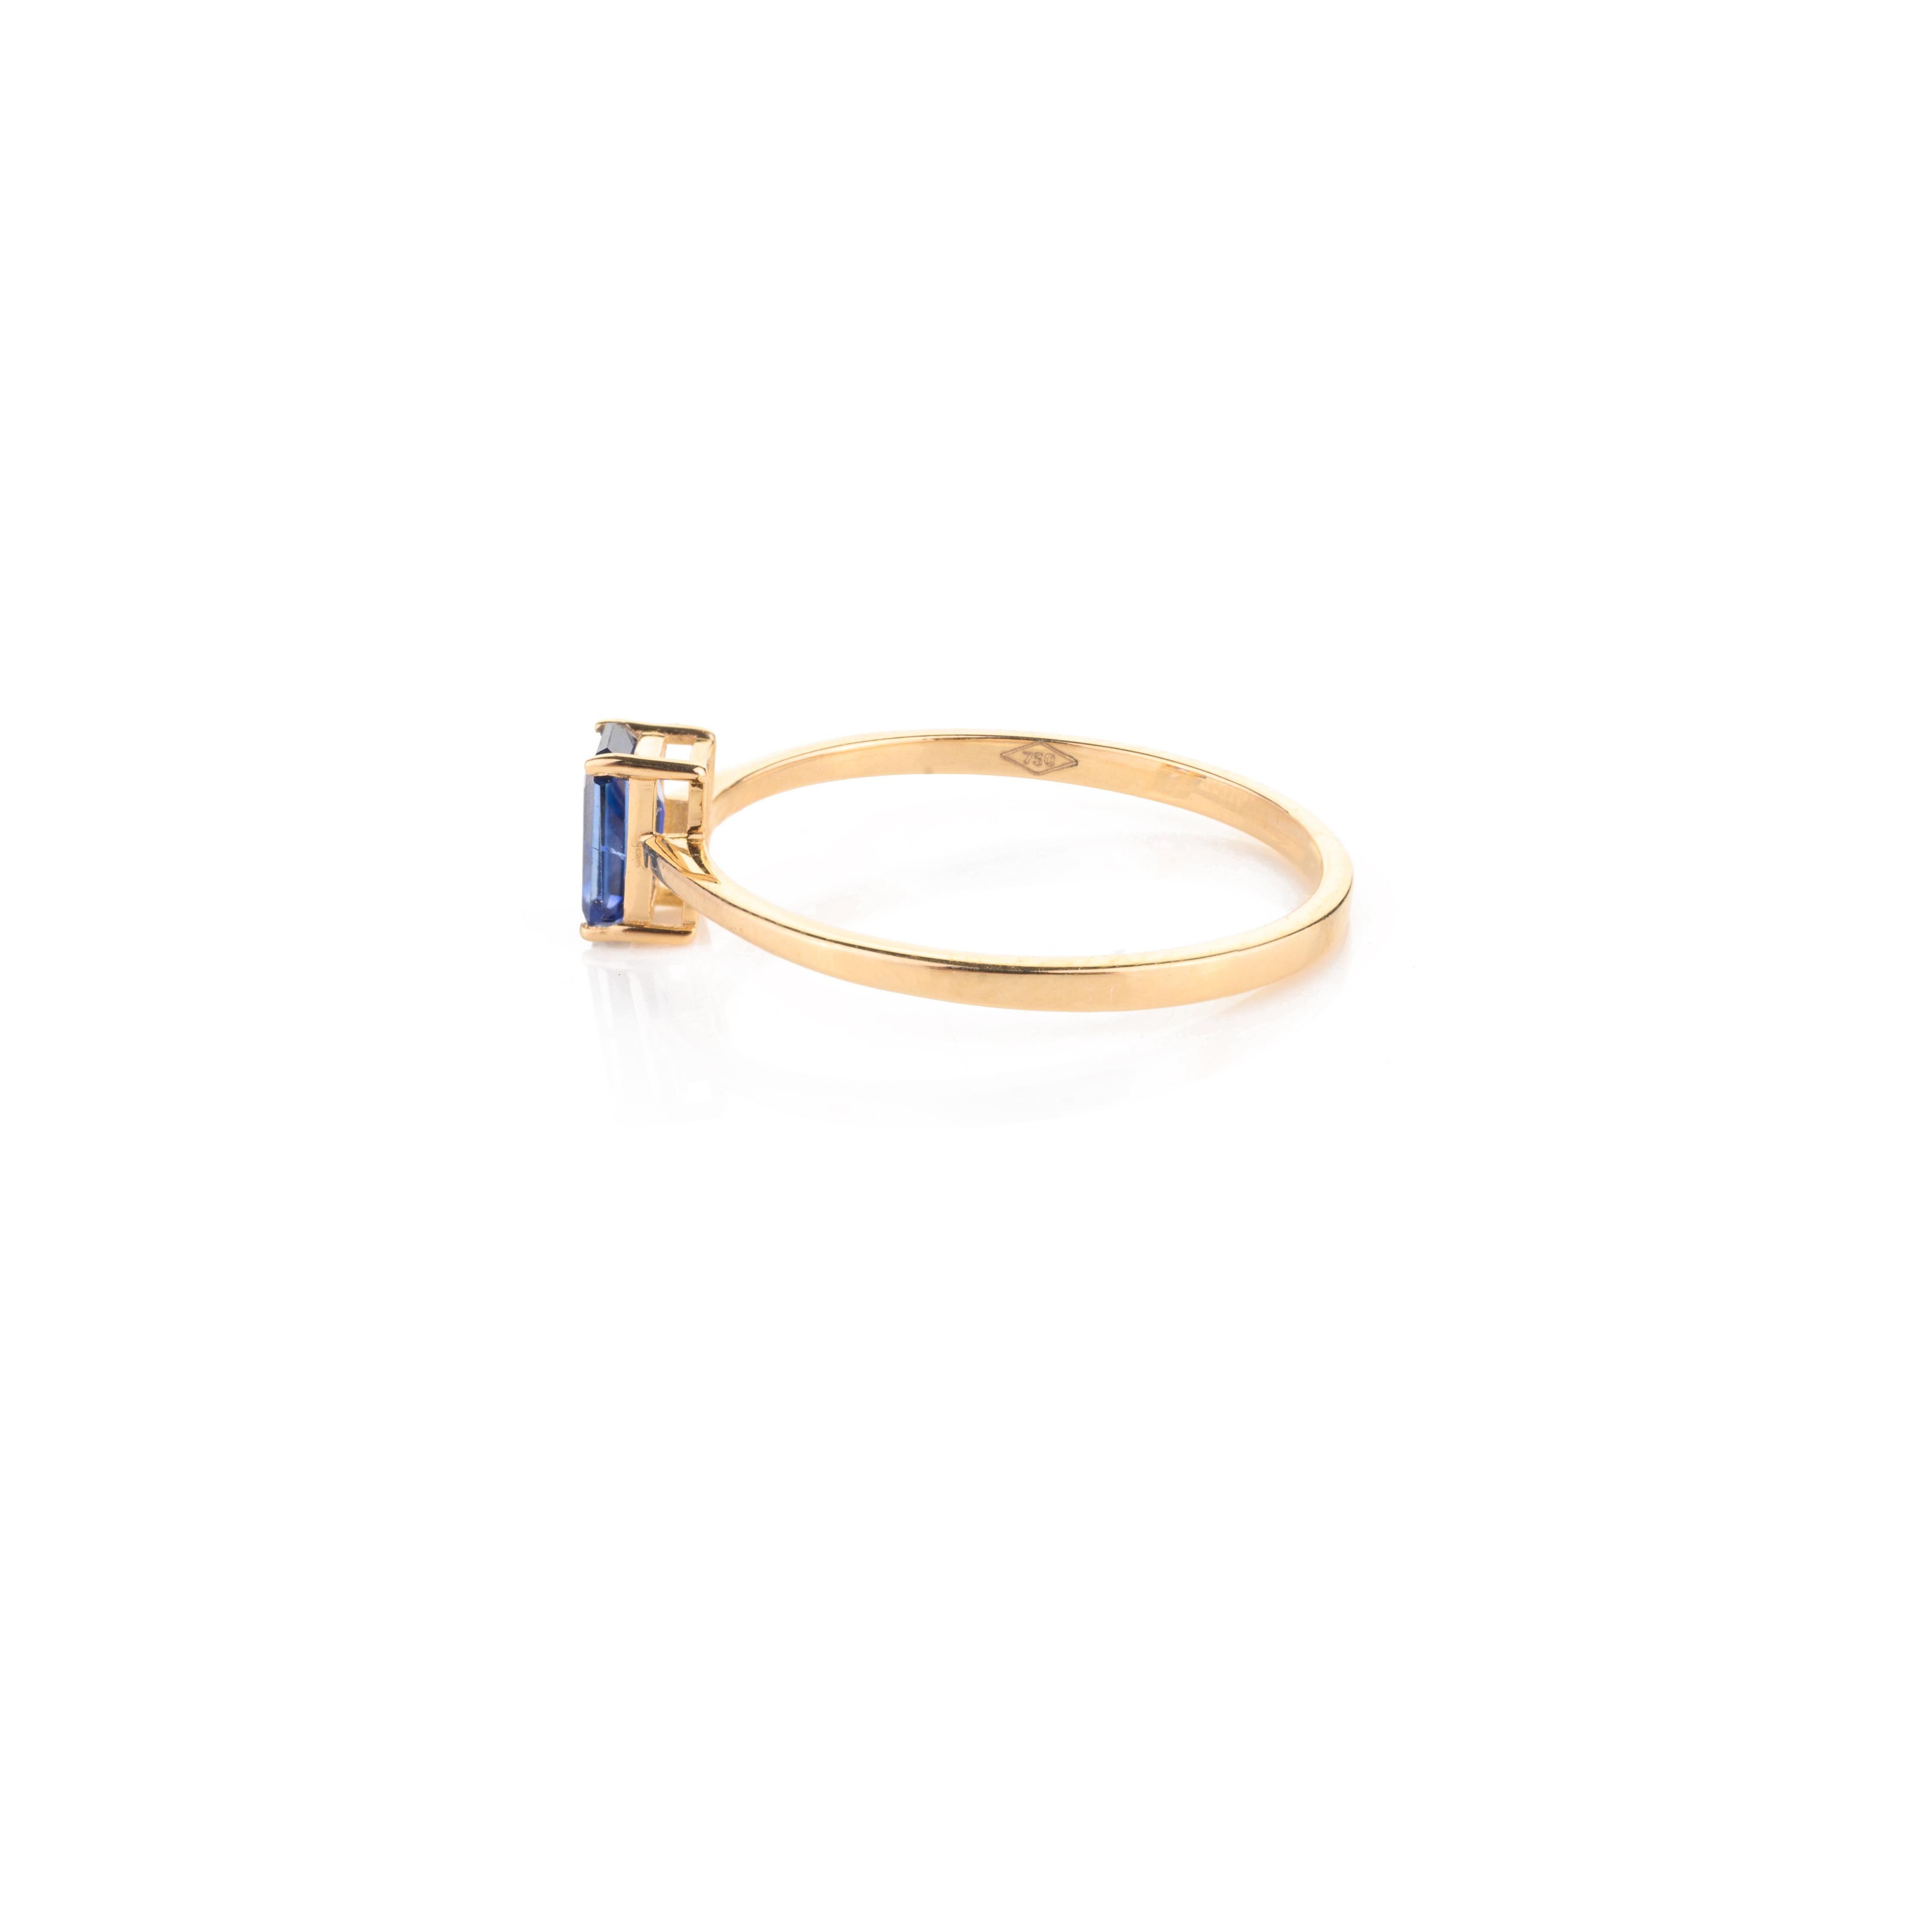 For Sale:  Minimal Baguette Cut Blue Sapphire Ring in 18k Solid Yellow Gold 9